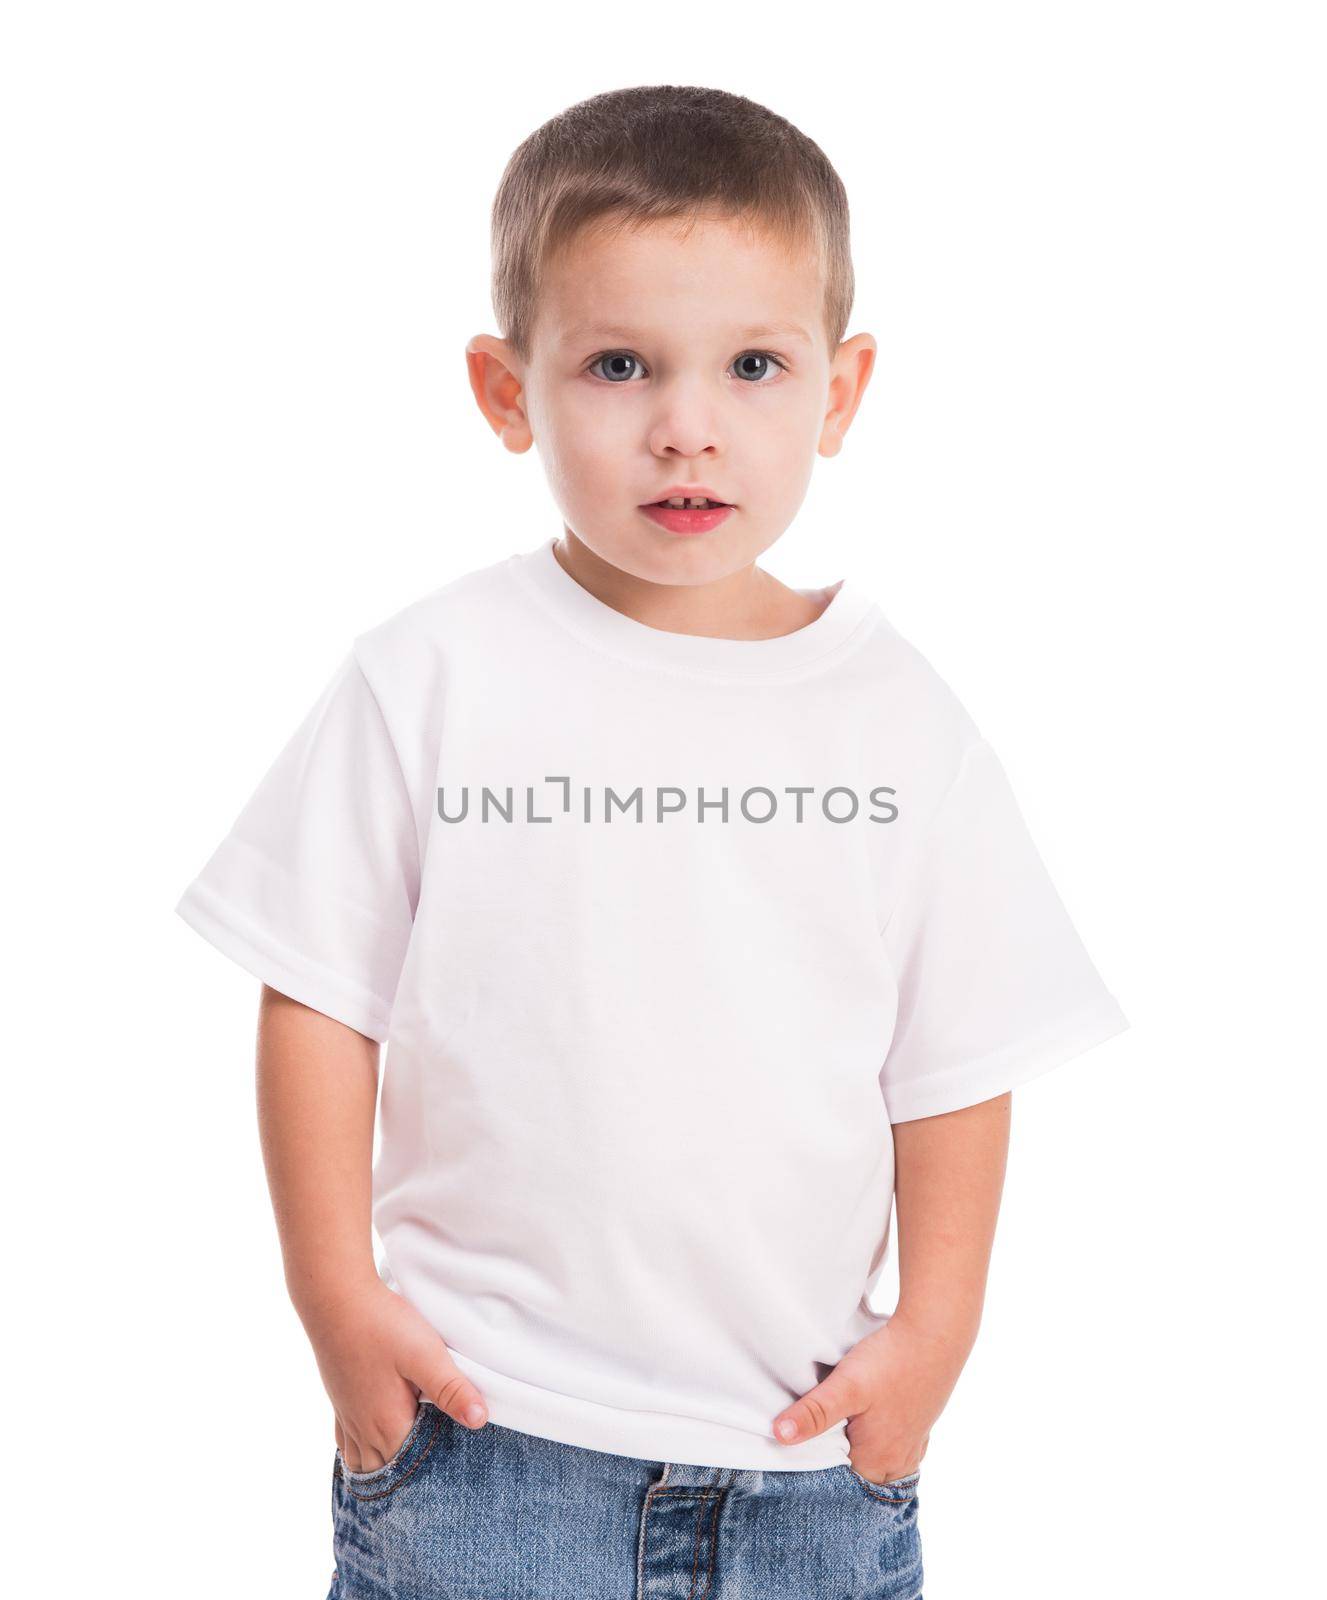 little boy in white shirt isolated on white background